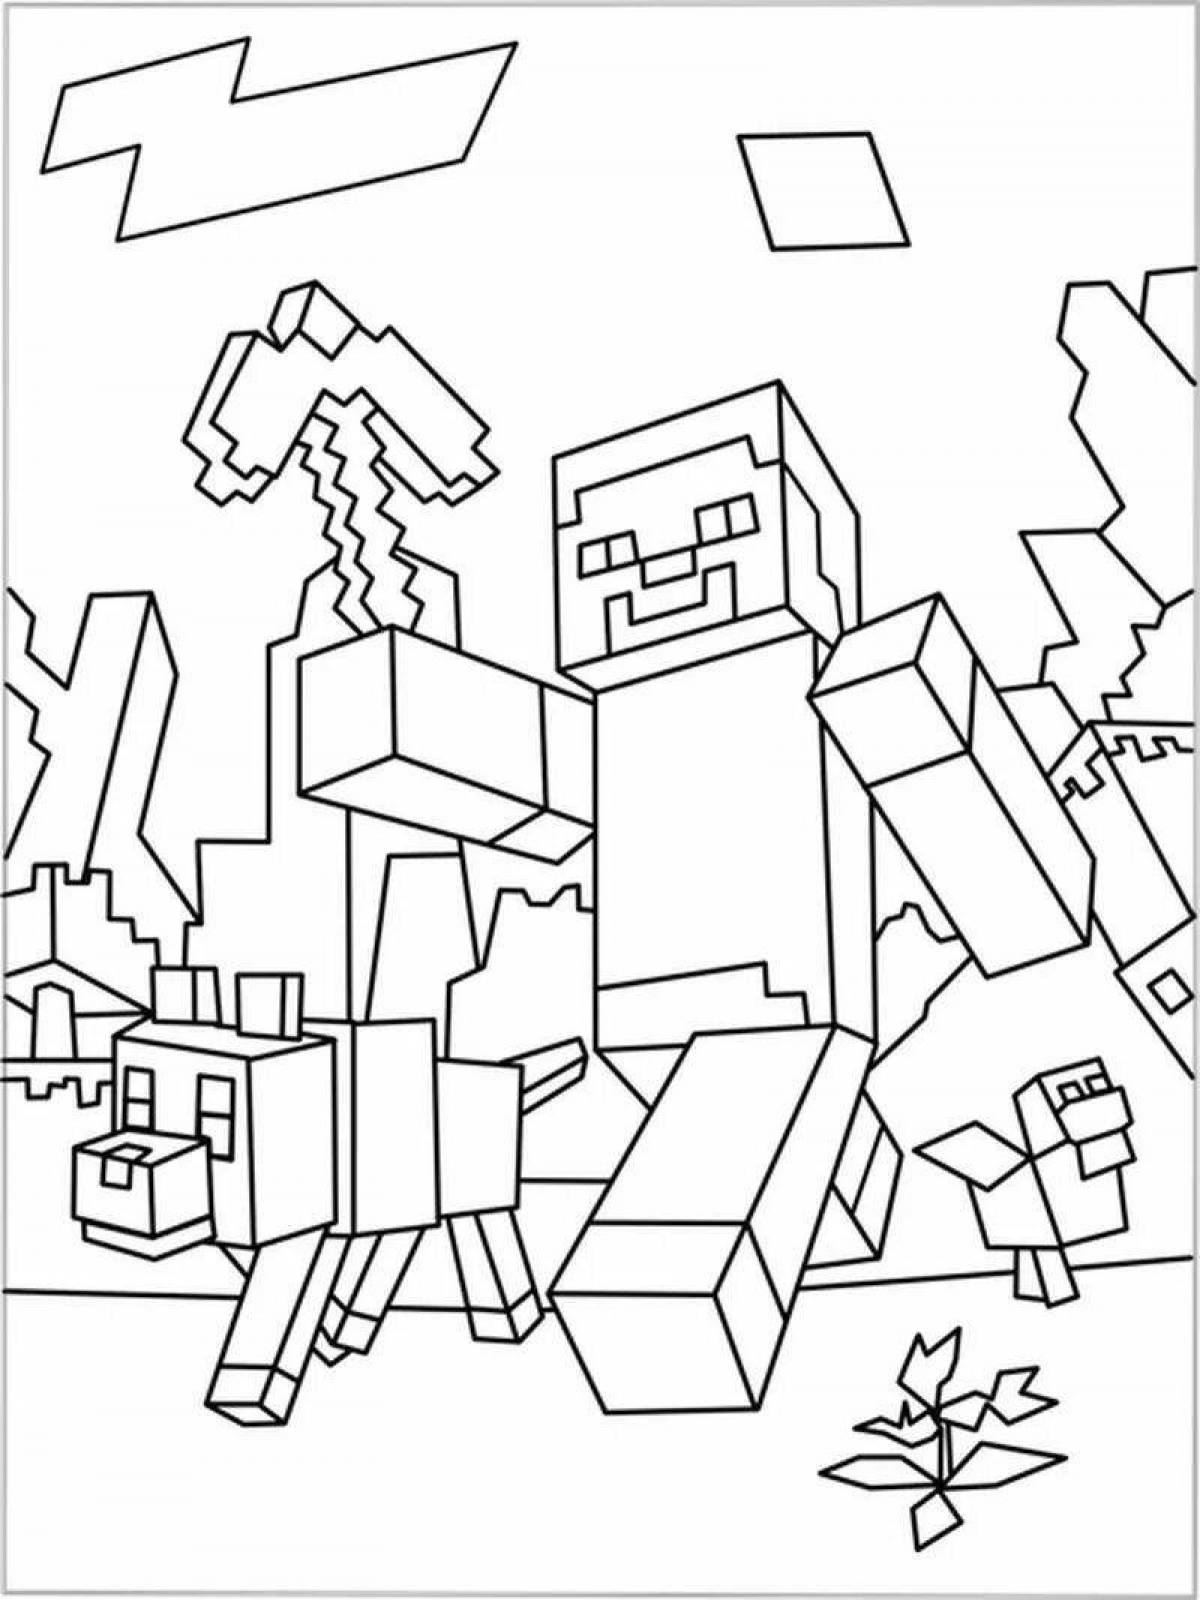 Attractive minecraft dots coloring page